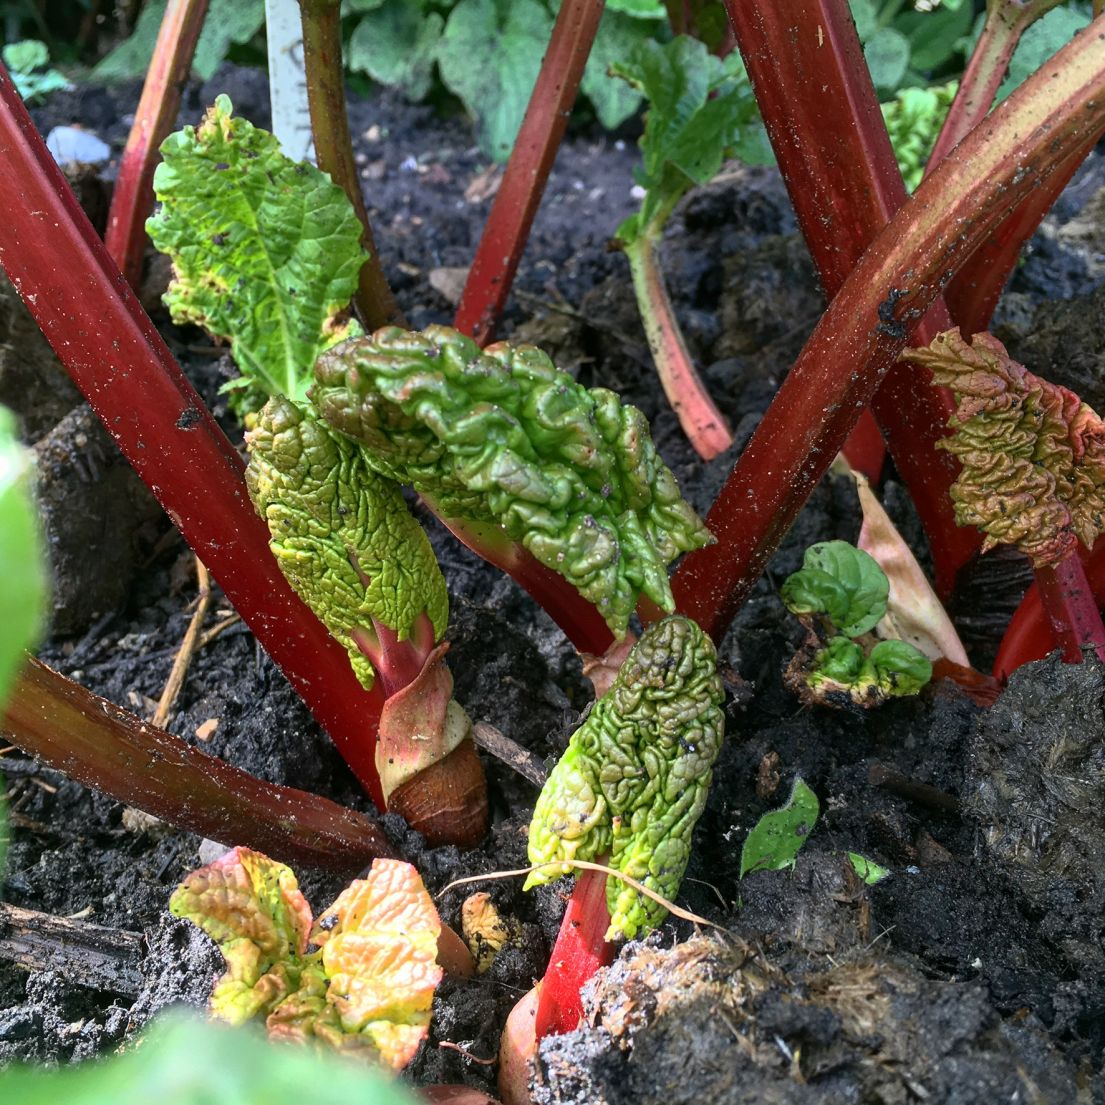 A picture of sprouting rhubarb from the soil.